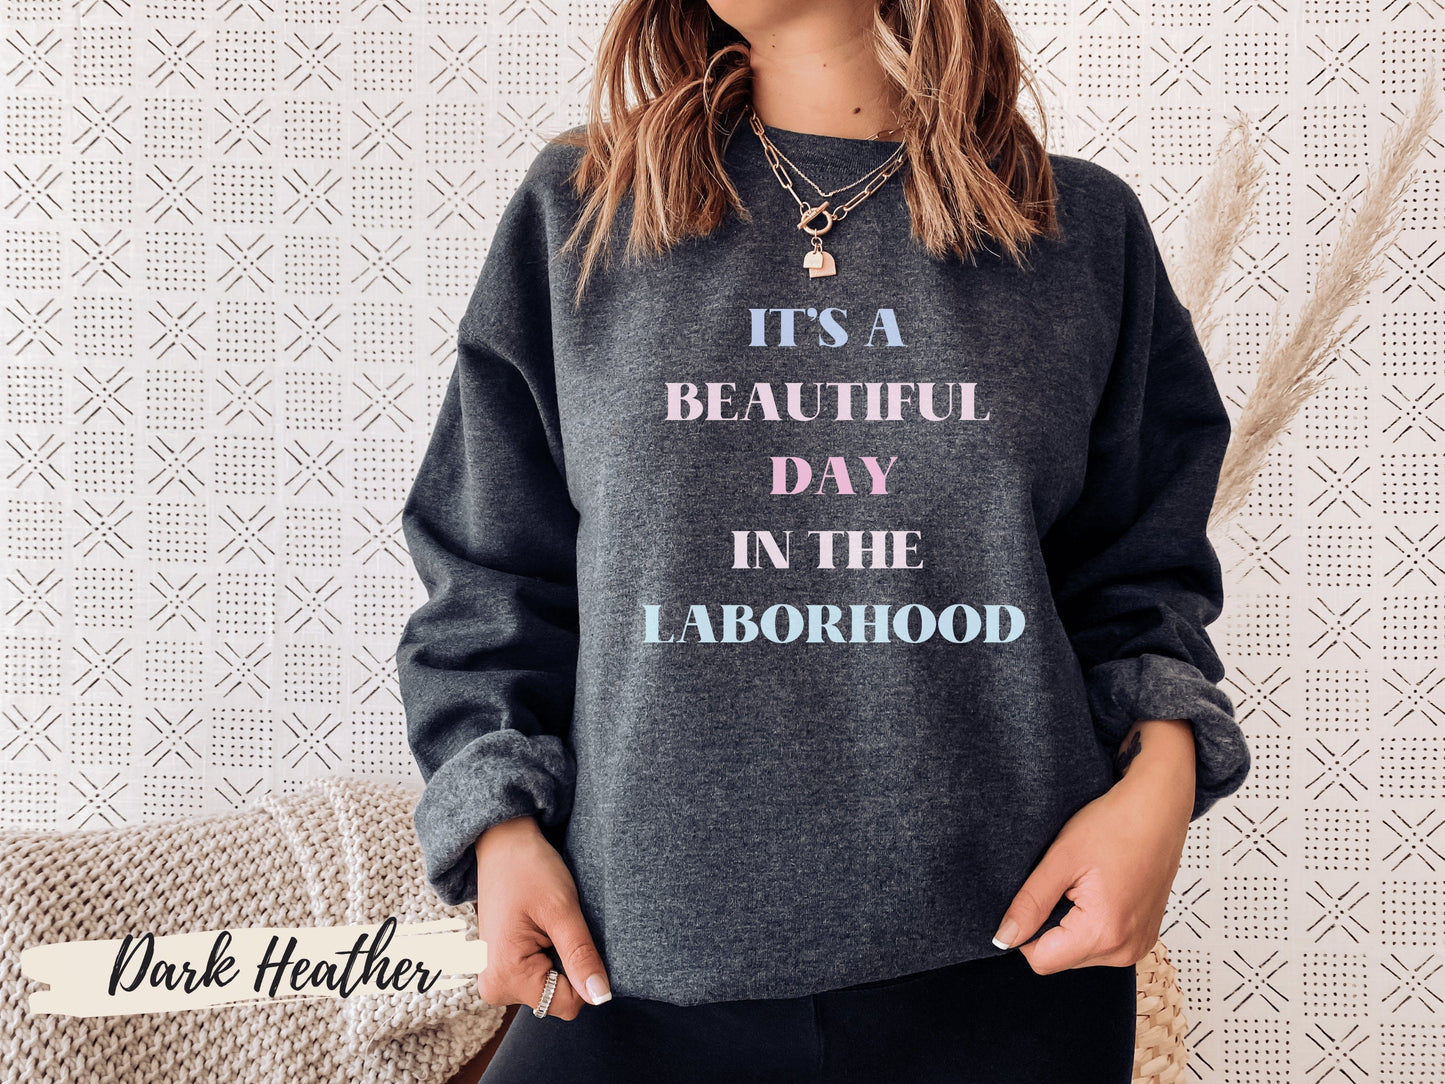 Beautiful Day in the Laborhood Shirt ,Labor And Delivery Nurse Sweatshirt ,OB Doctor Gift,Midwife Shirt,Nursing School Student, Birth Worker